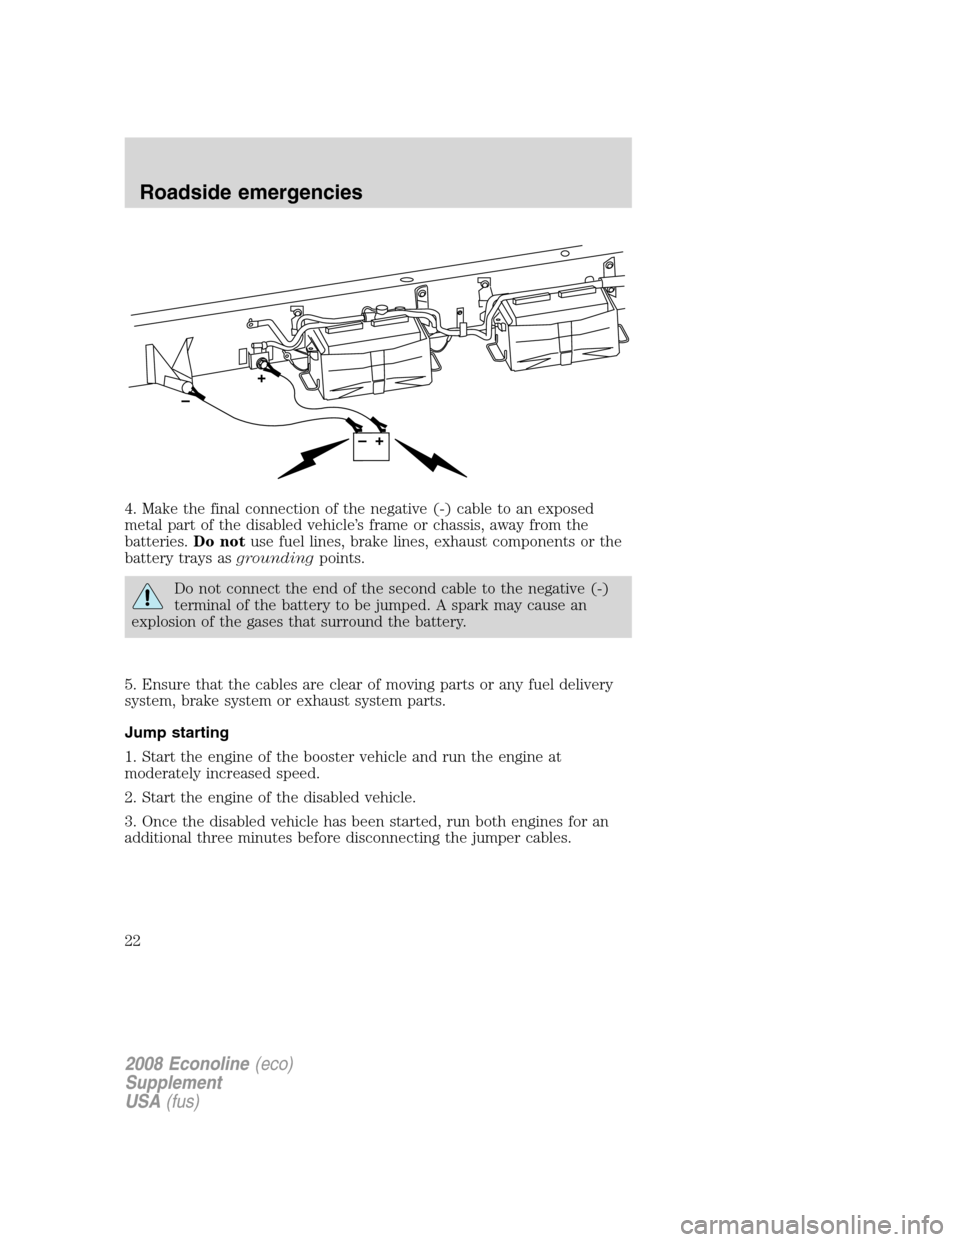 FORD SUPER DUTY 2008 2.G Diesel Supplement Manual 4. Make the final connection of the negative (-) cable to an exposed
metal part of the disabled vehicle’s frame or chassis, away from the
batteries.Do notuse fuel lines, brake lines, exhaust compone